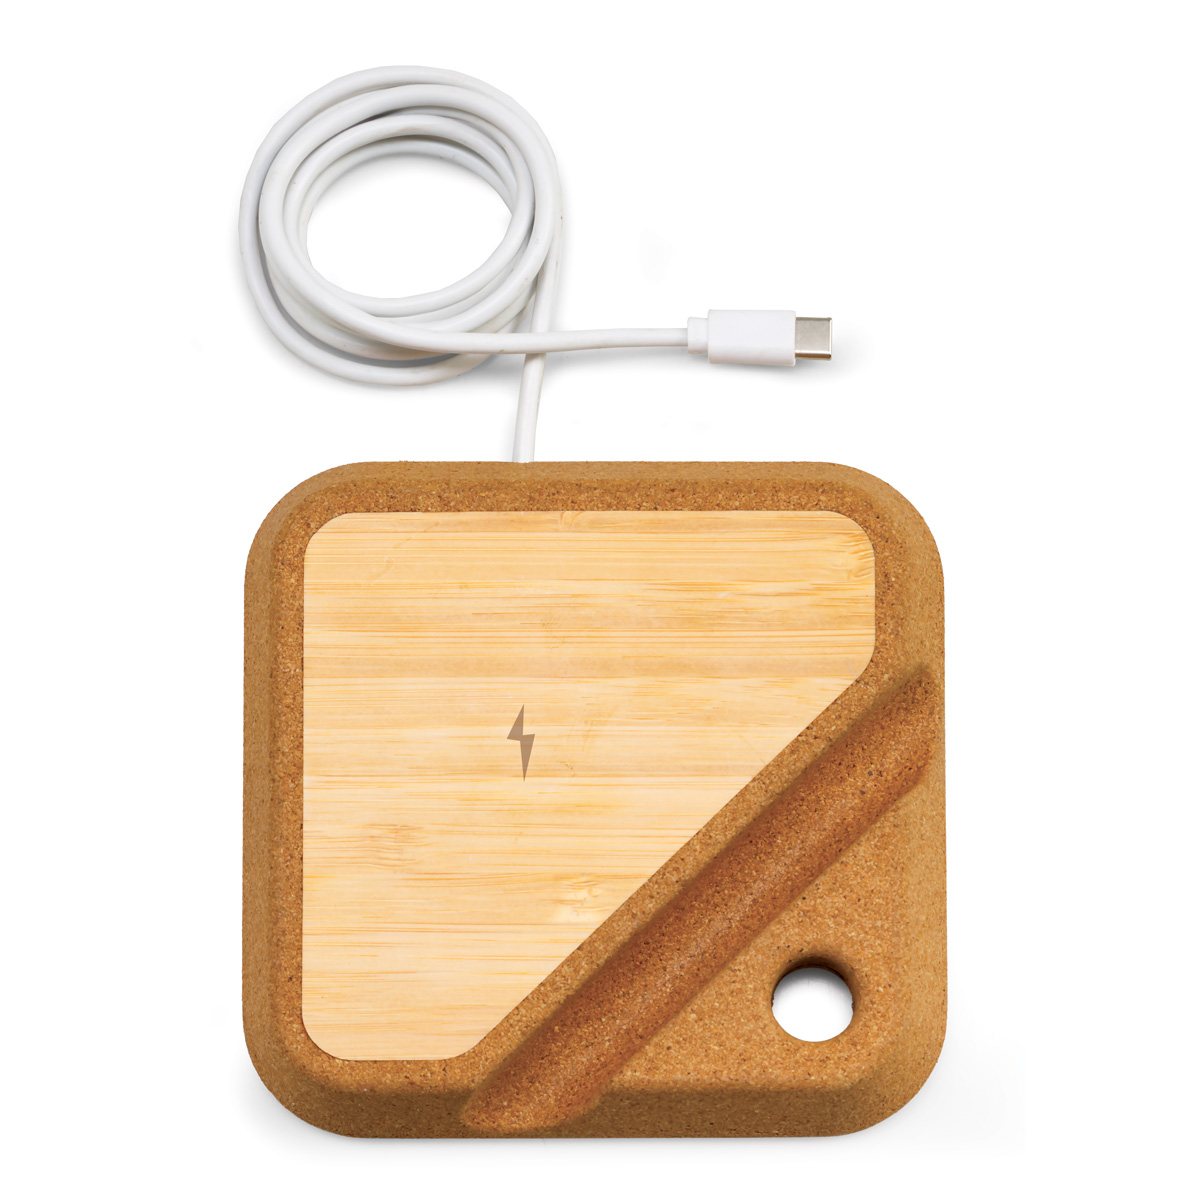 Benyer Cork Wireless Charger Product Image